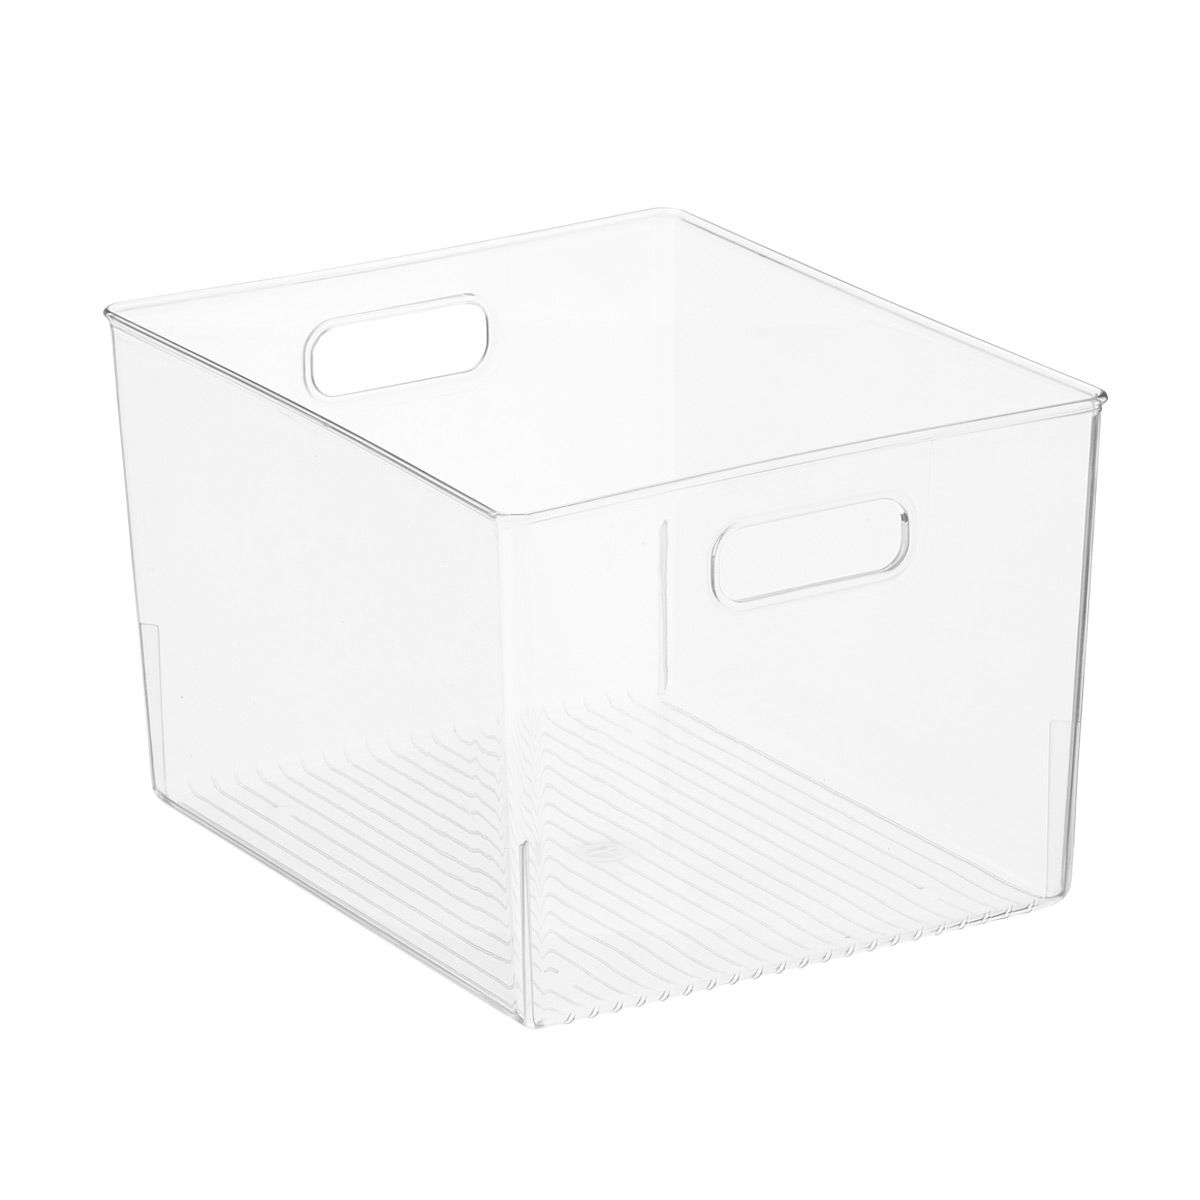 iDESIGN Linus Large Kitchen Bin Clear | The Container Store